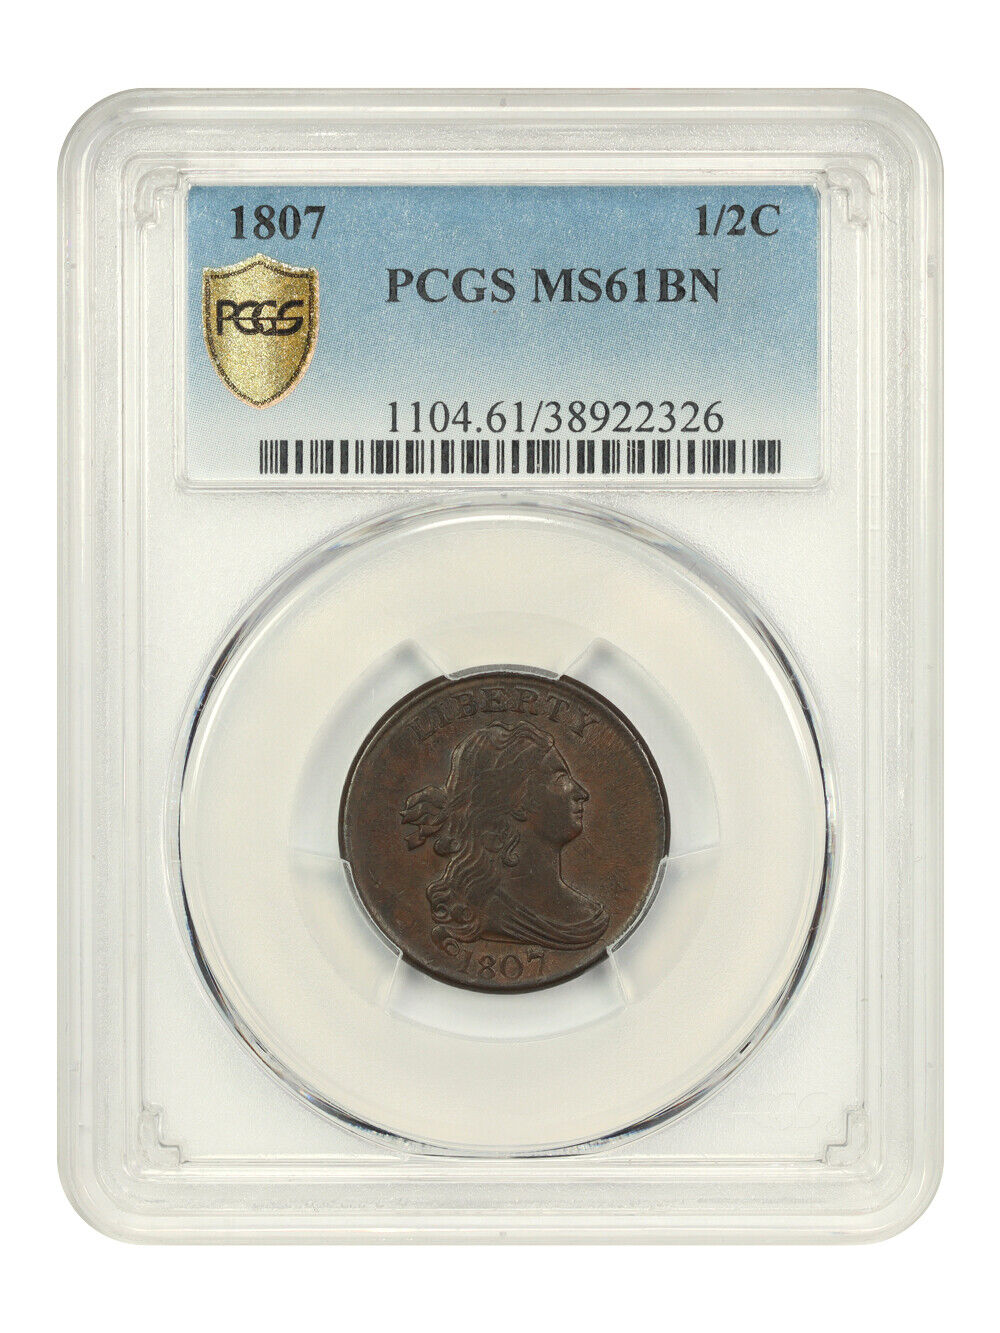 1807 1/2c Pcgs Ms61 Bn - Lovely Type Coin - Draped Bust Half Cents (1800-1808)